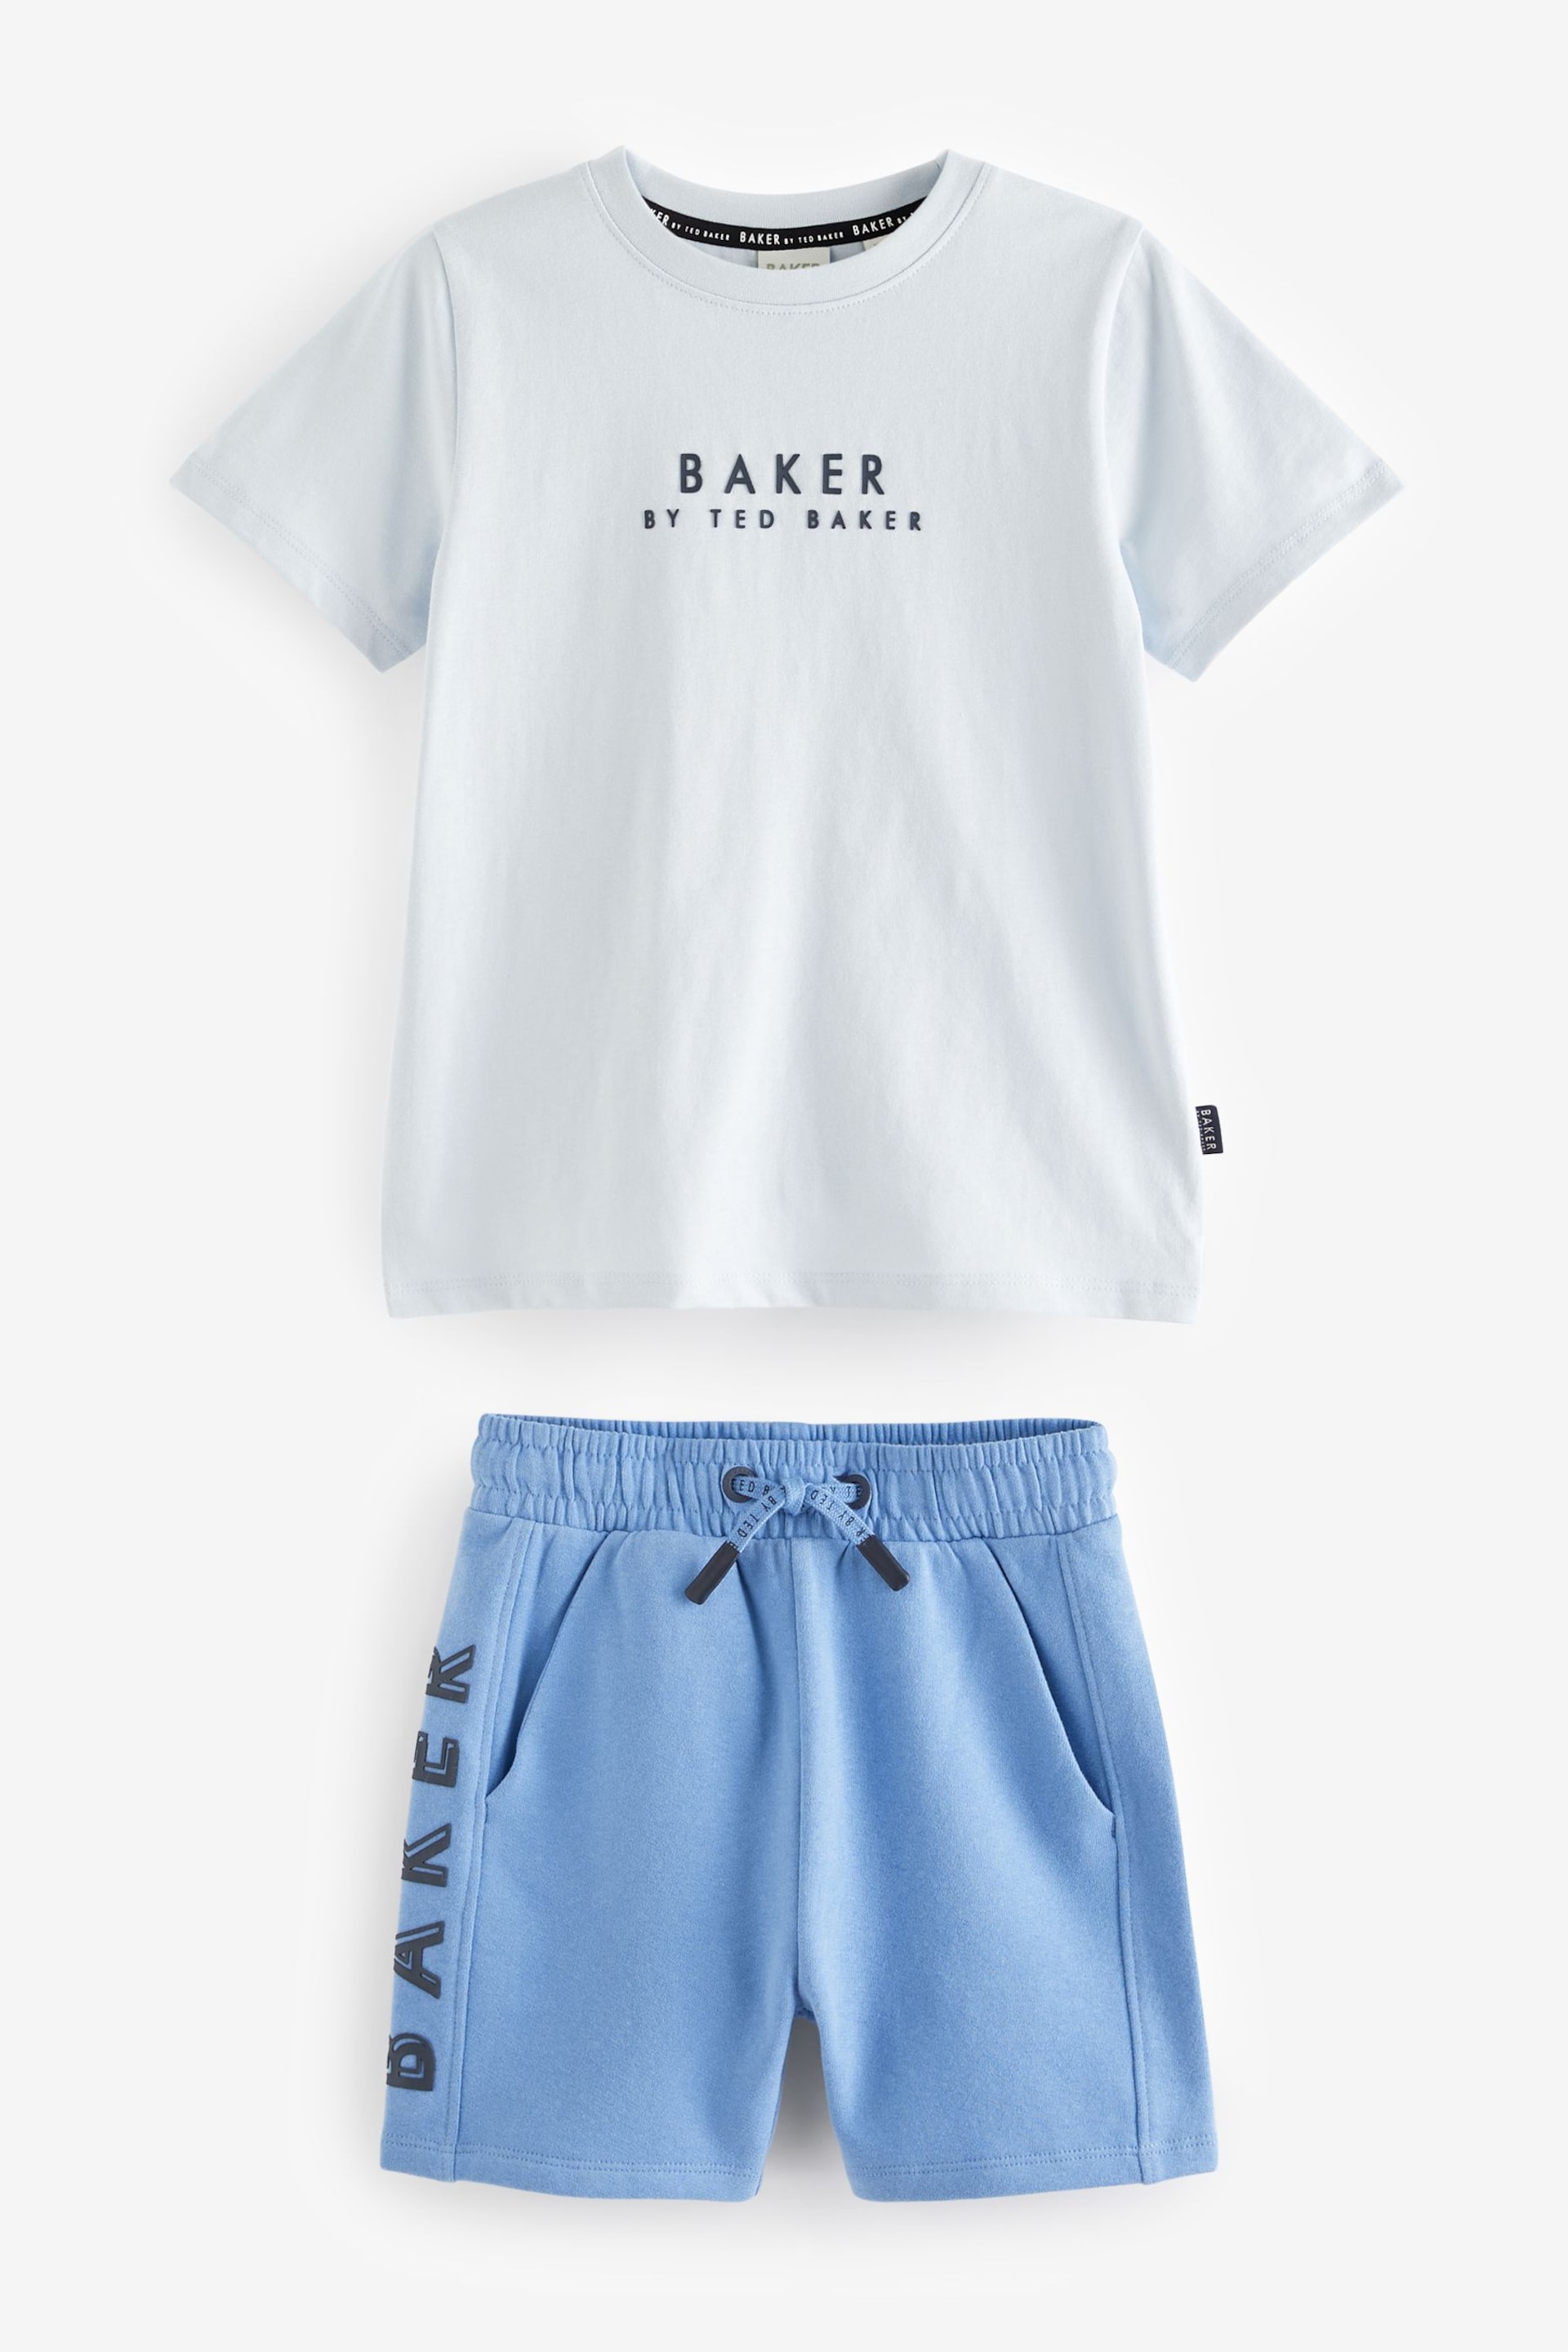 Baker by Ted Baker T-Shirt and Shorts Set - Image 4 of 7